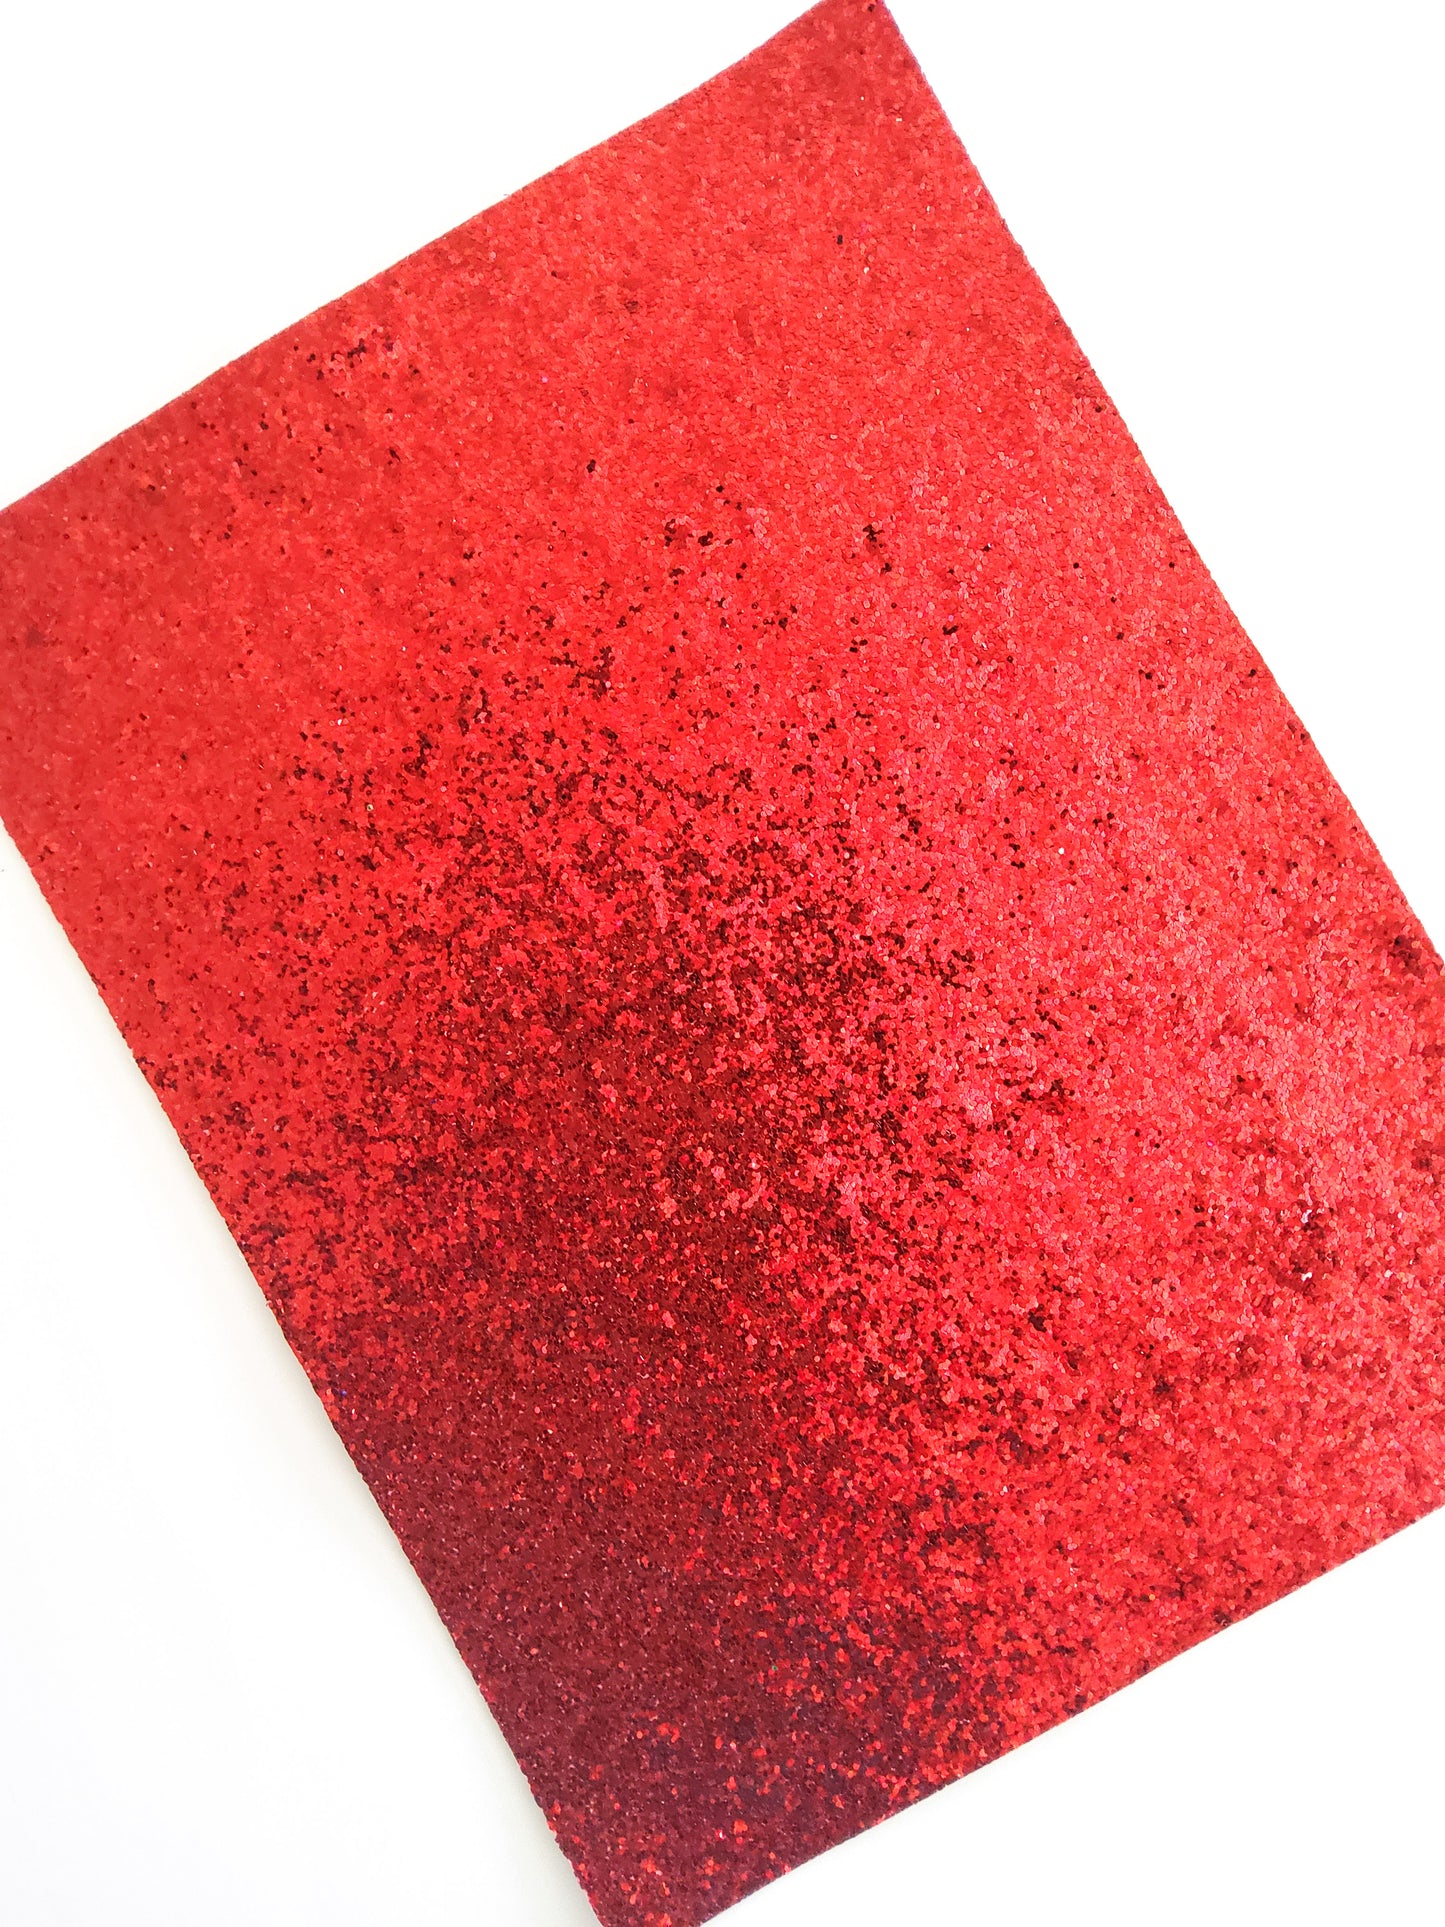 Red Chunky Glitter 9x12 thin faux leather sheet